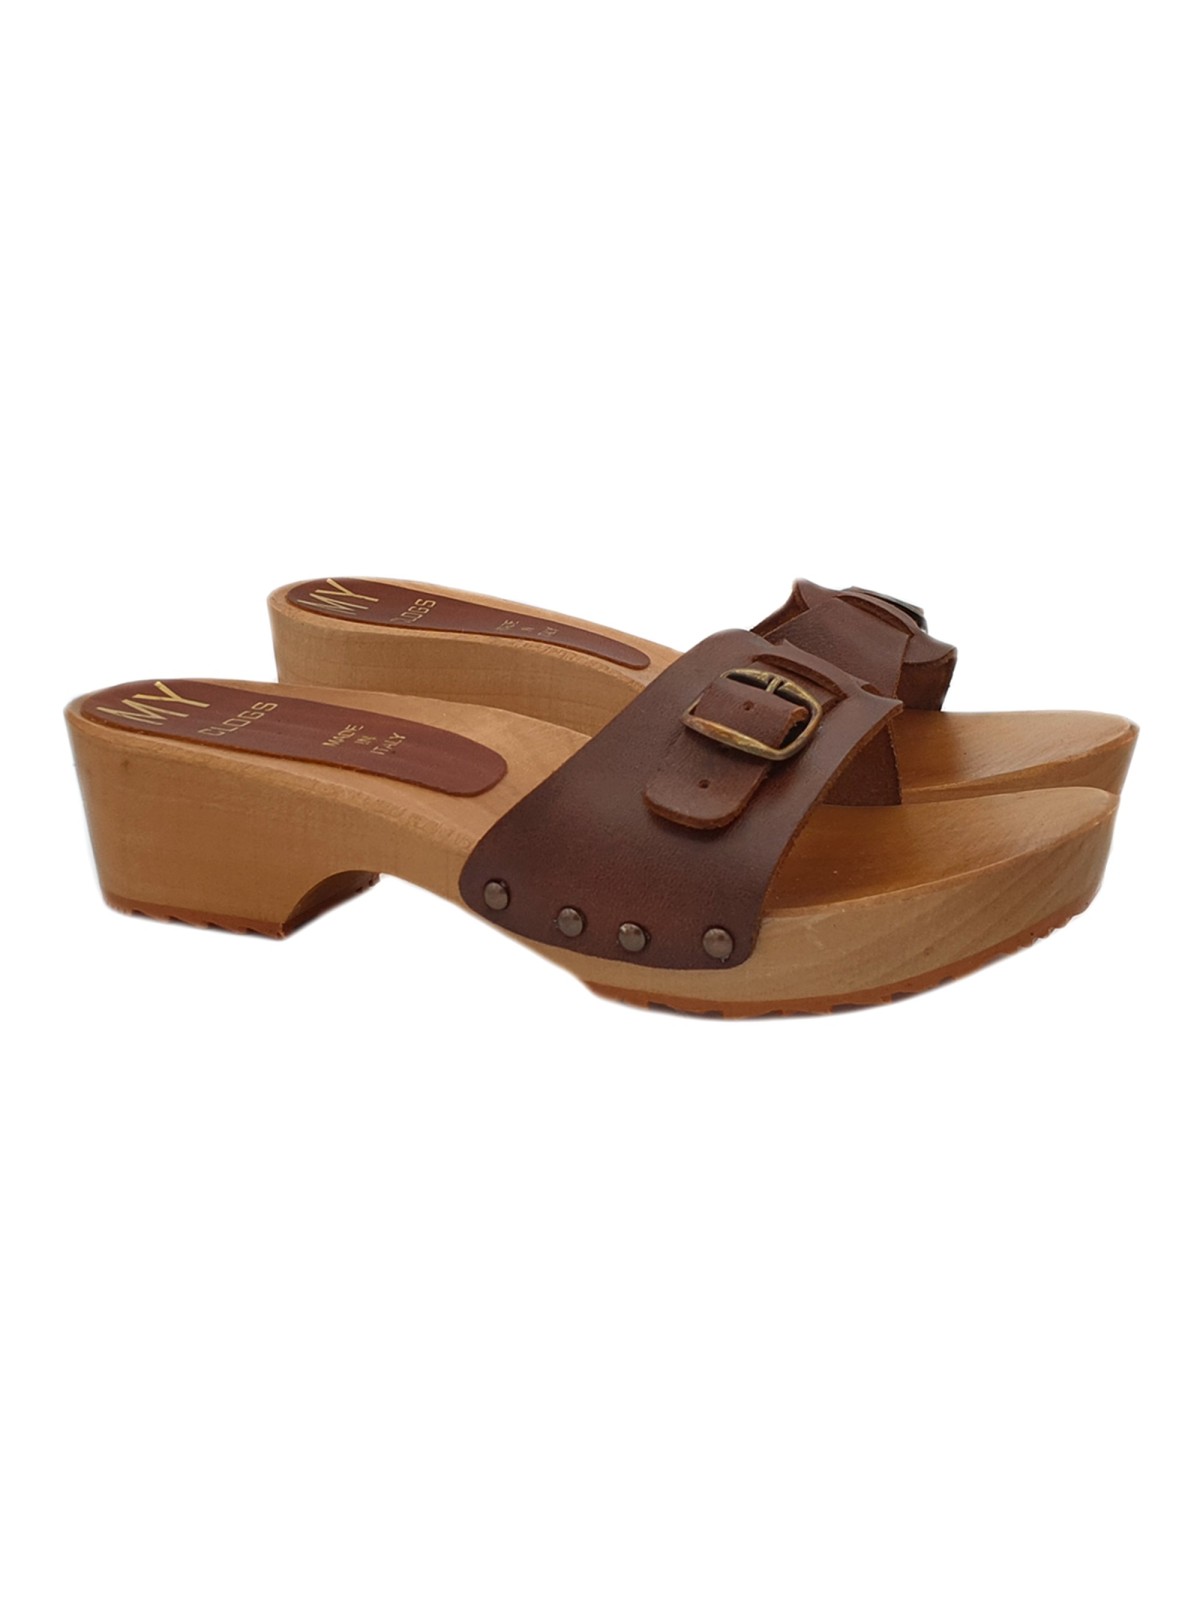 BROWN LEATHER SWEDISH CLOGS IN WOOD